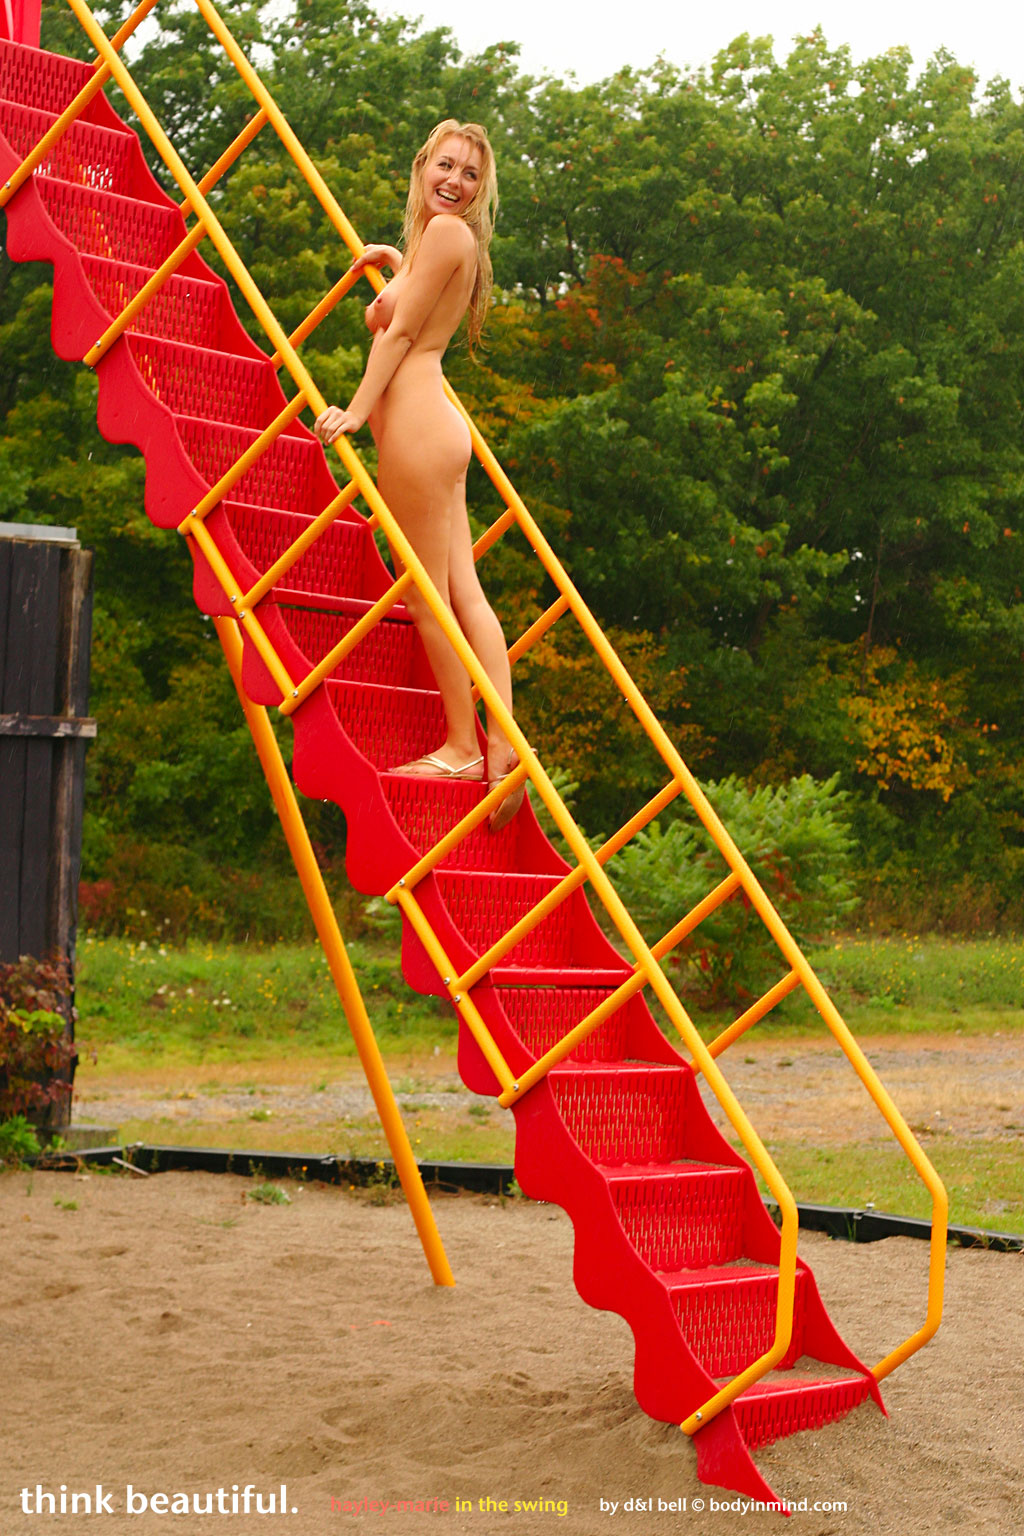 Hayley Marie Coppin Nude at a Playground.